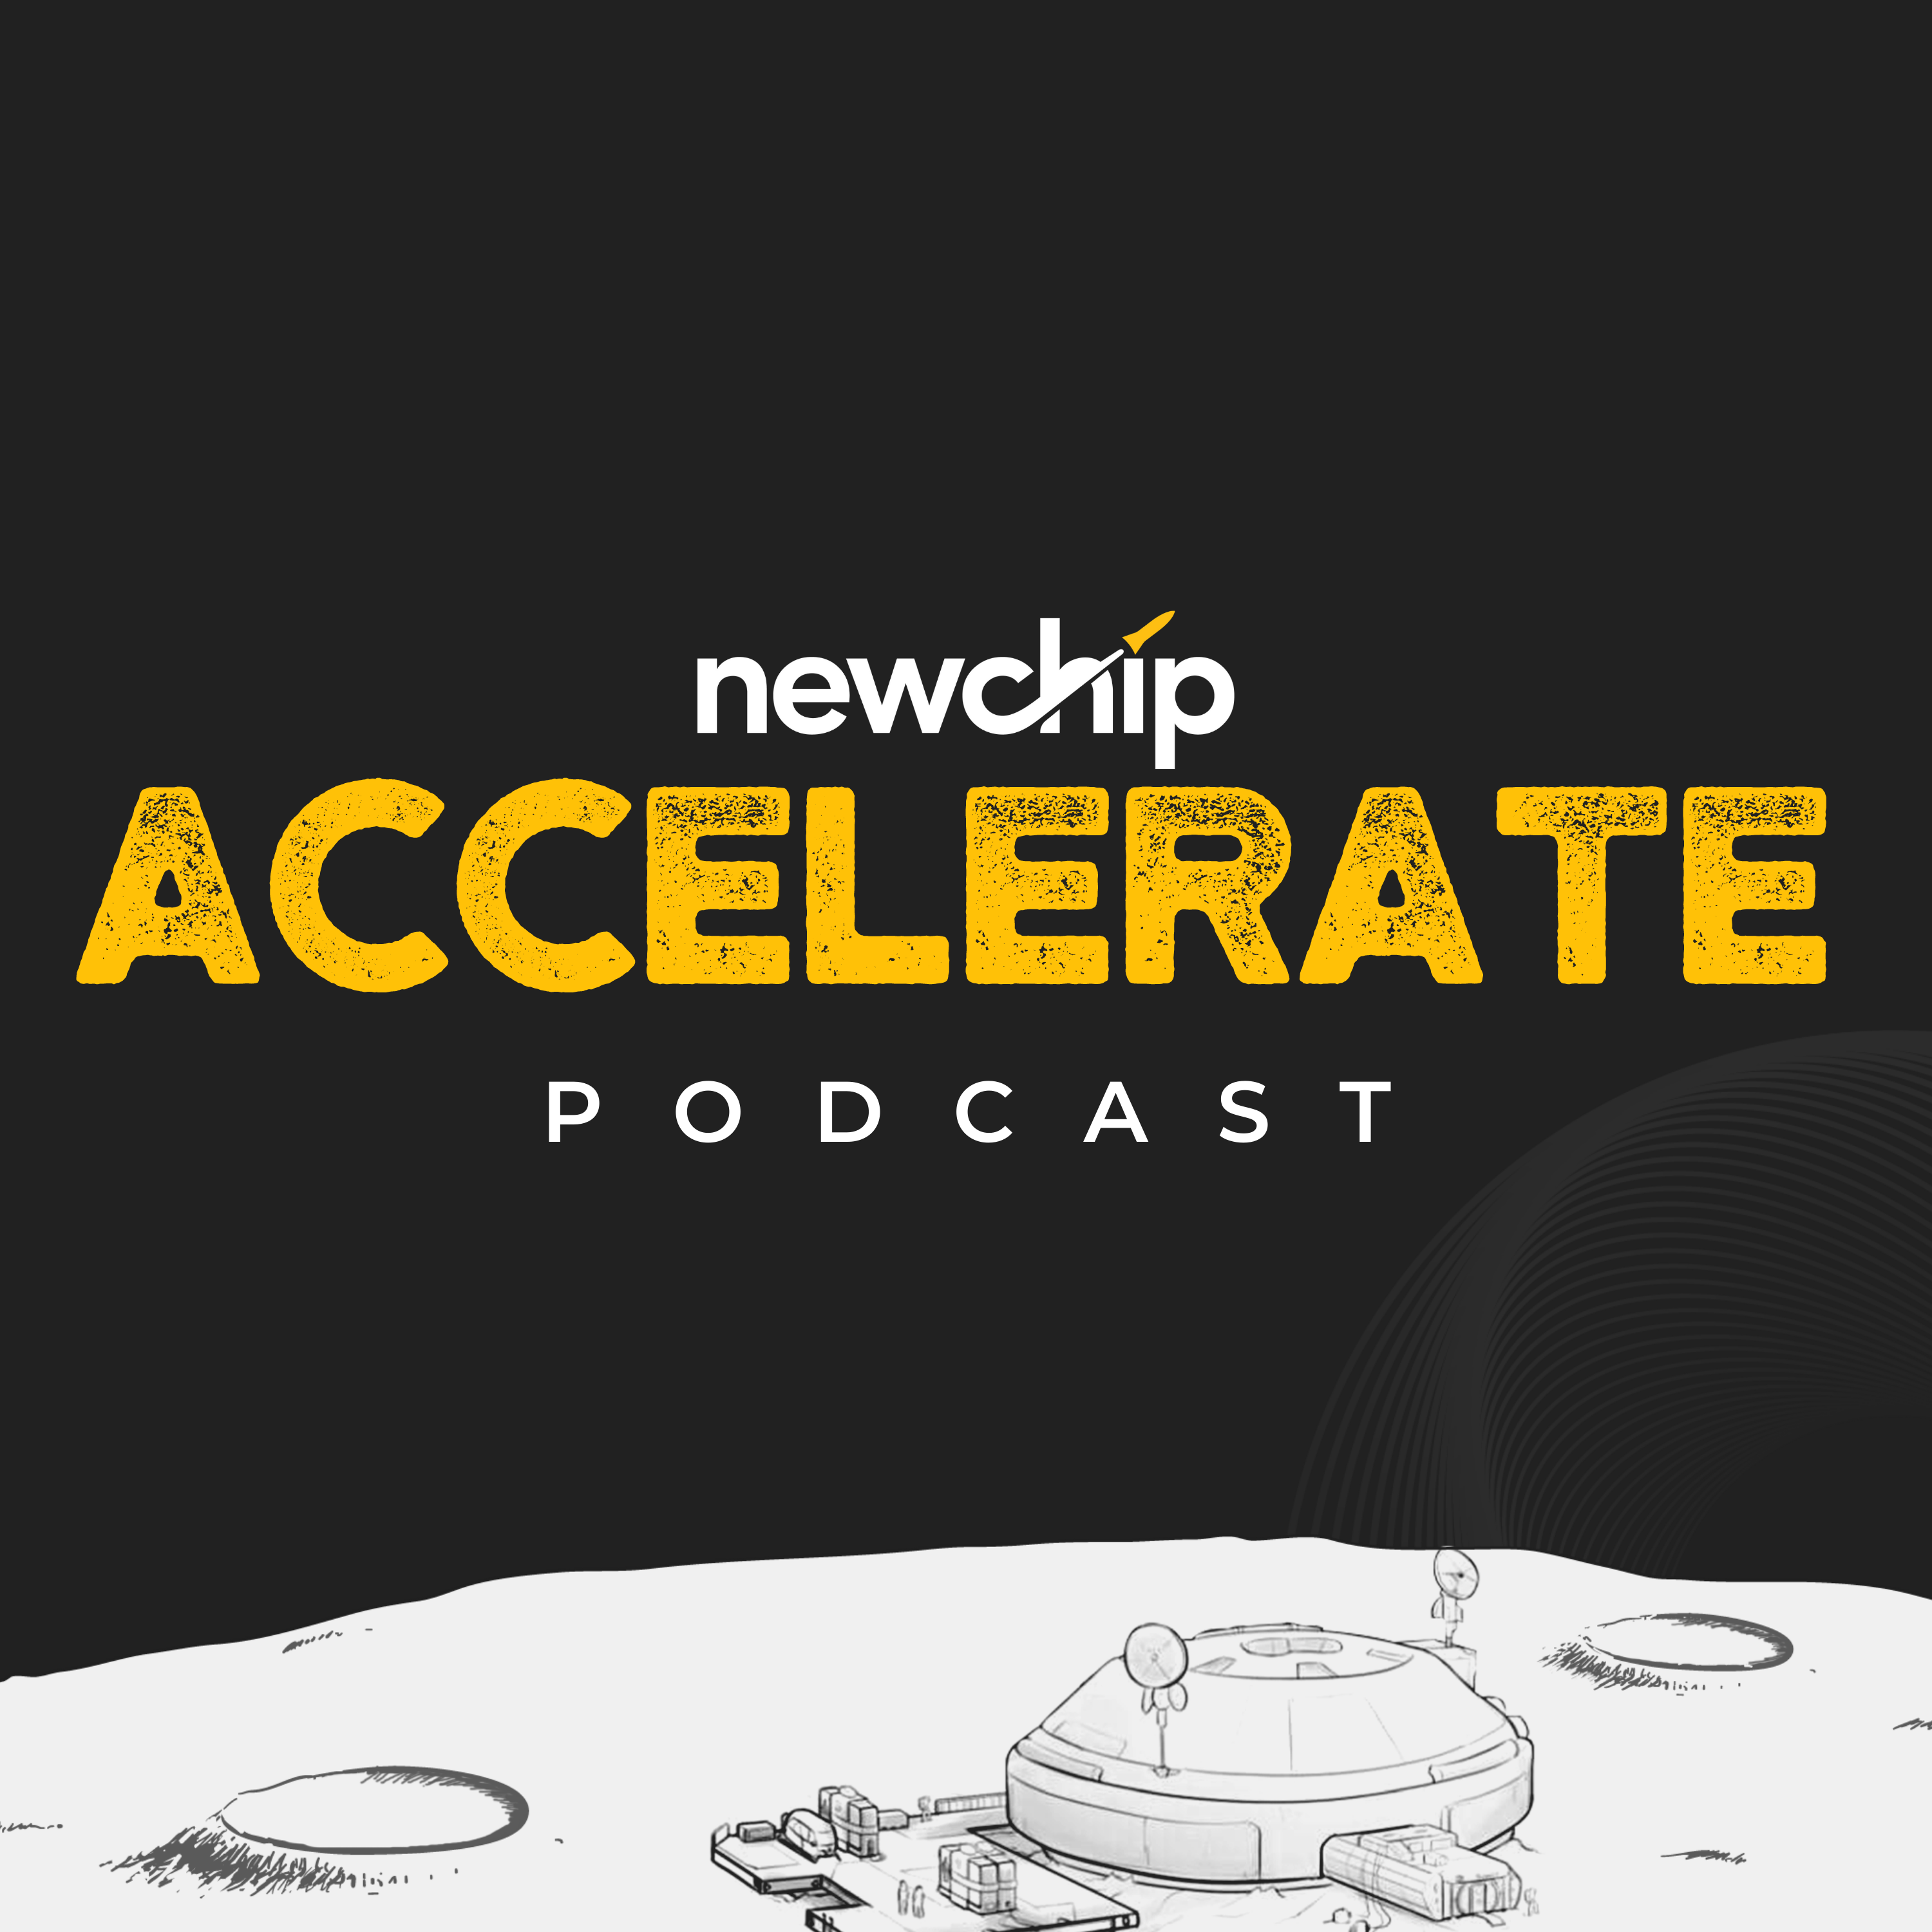 Artwork for podcast Newchip: Accelerate